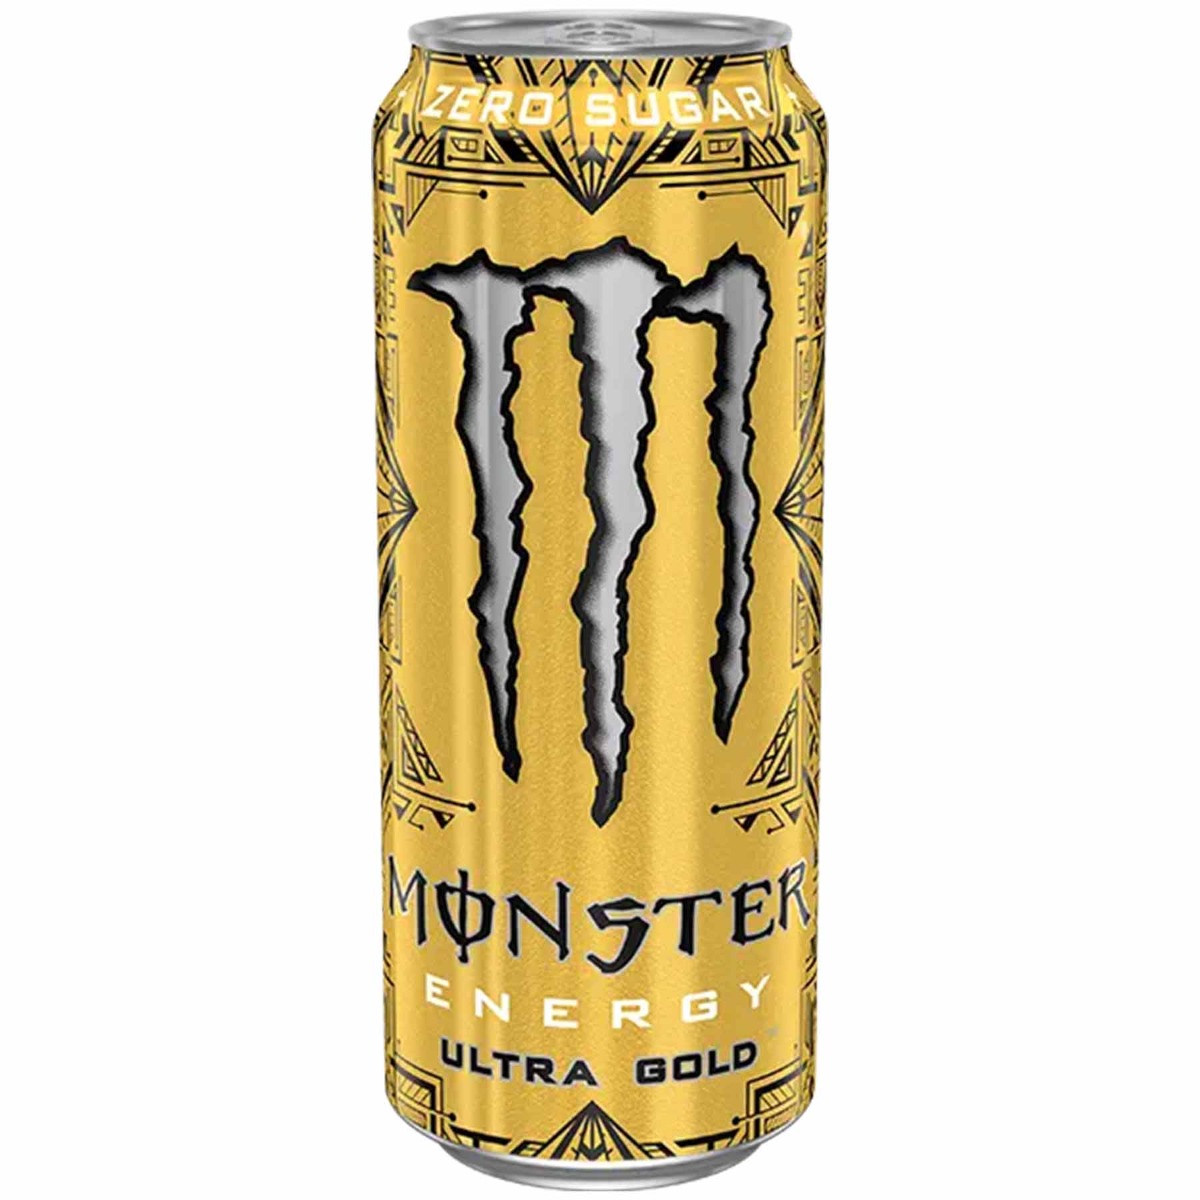 Energidryck, Monster ultra gold 50 cl